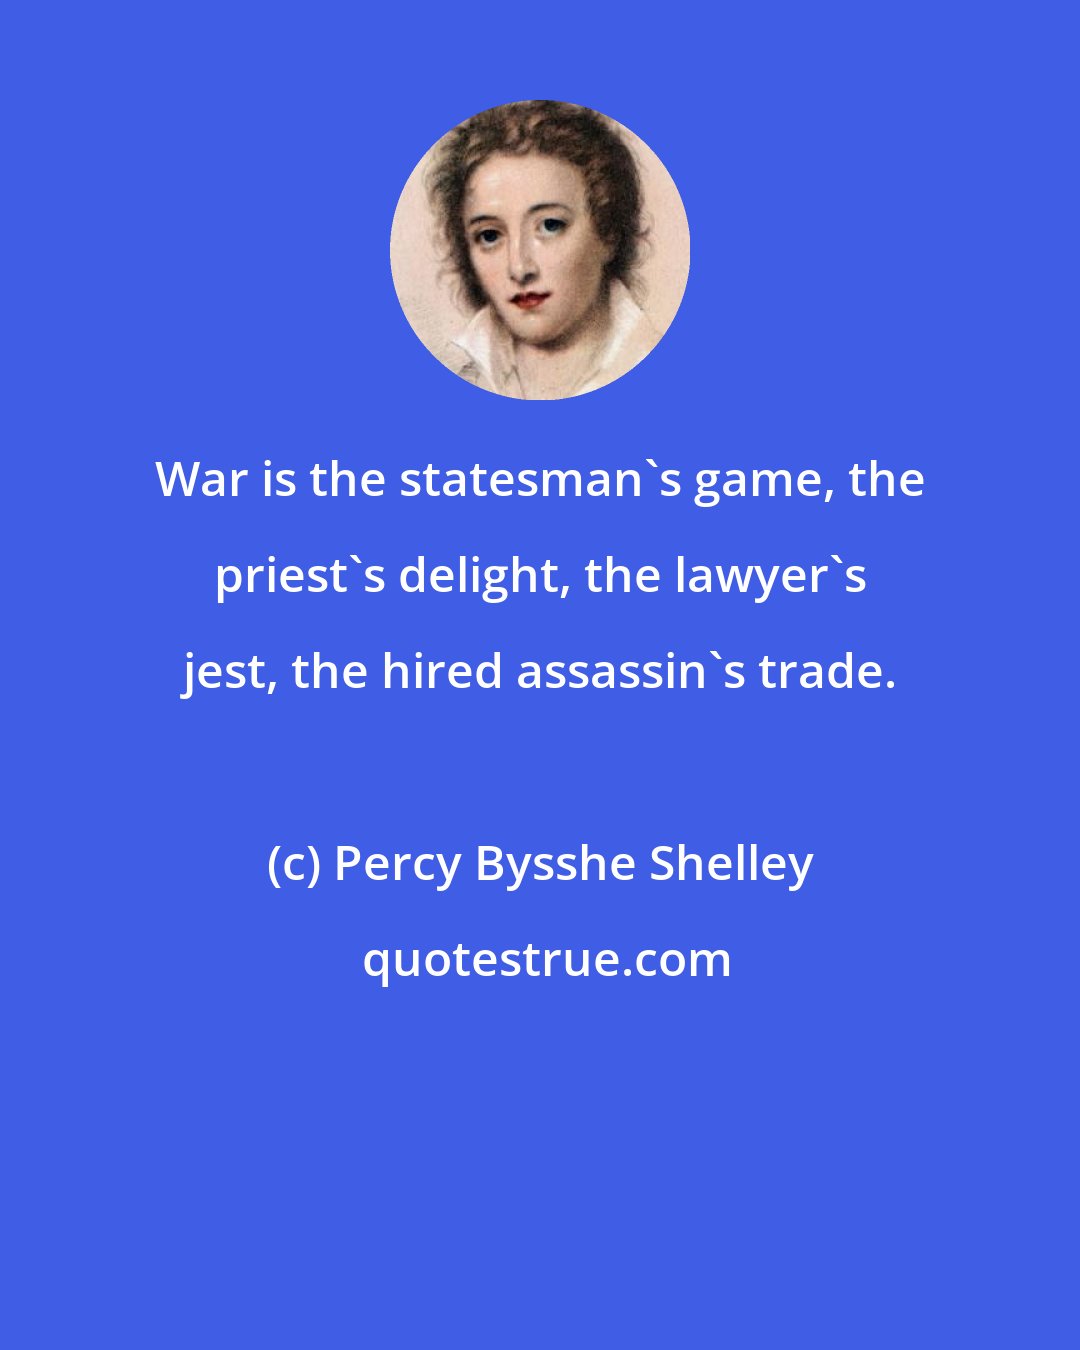 Percy Bysshe Shelley: War is the statesman's game, the priest's delight, the lawyer's jest, the hired assassin's trade.